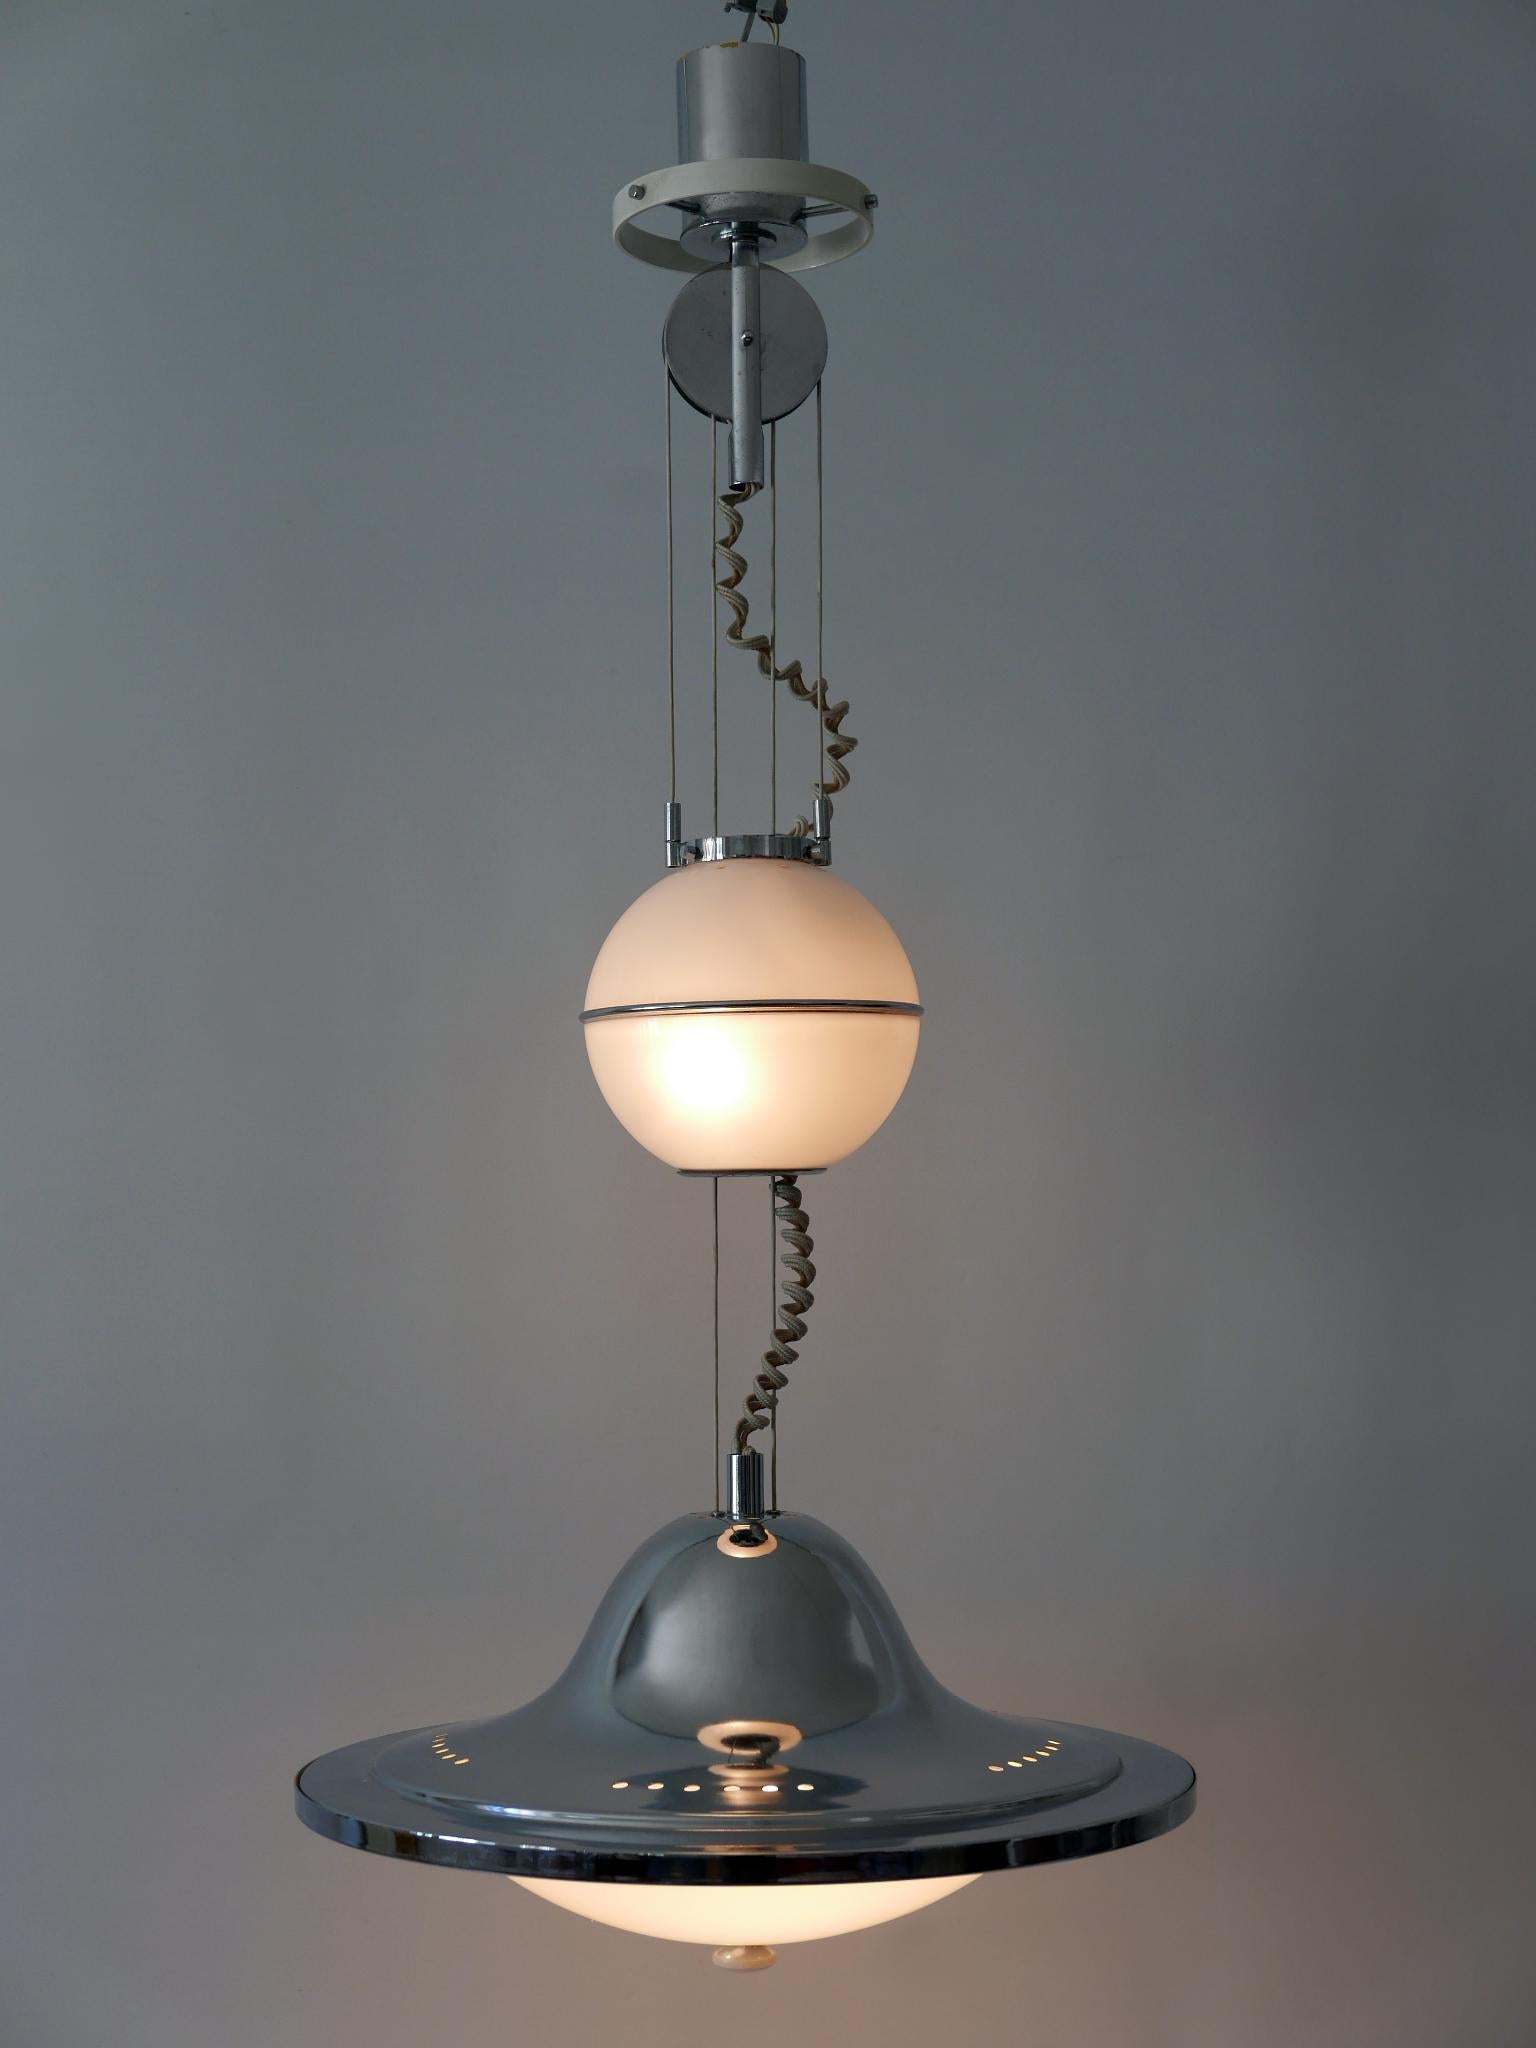 Gorgeous, extremely rare and highly decorative Mid-Century Modern counterweight pendant lamp or hanging light 'UFO'. Designed & manufactured in Italy, 1960s.

Executed in chrome-plated metal and white lucite, the pendant lamp needs 3 x E27 / E26